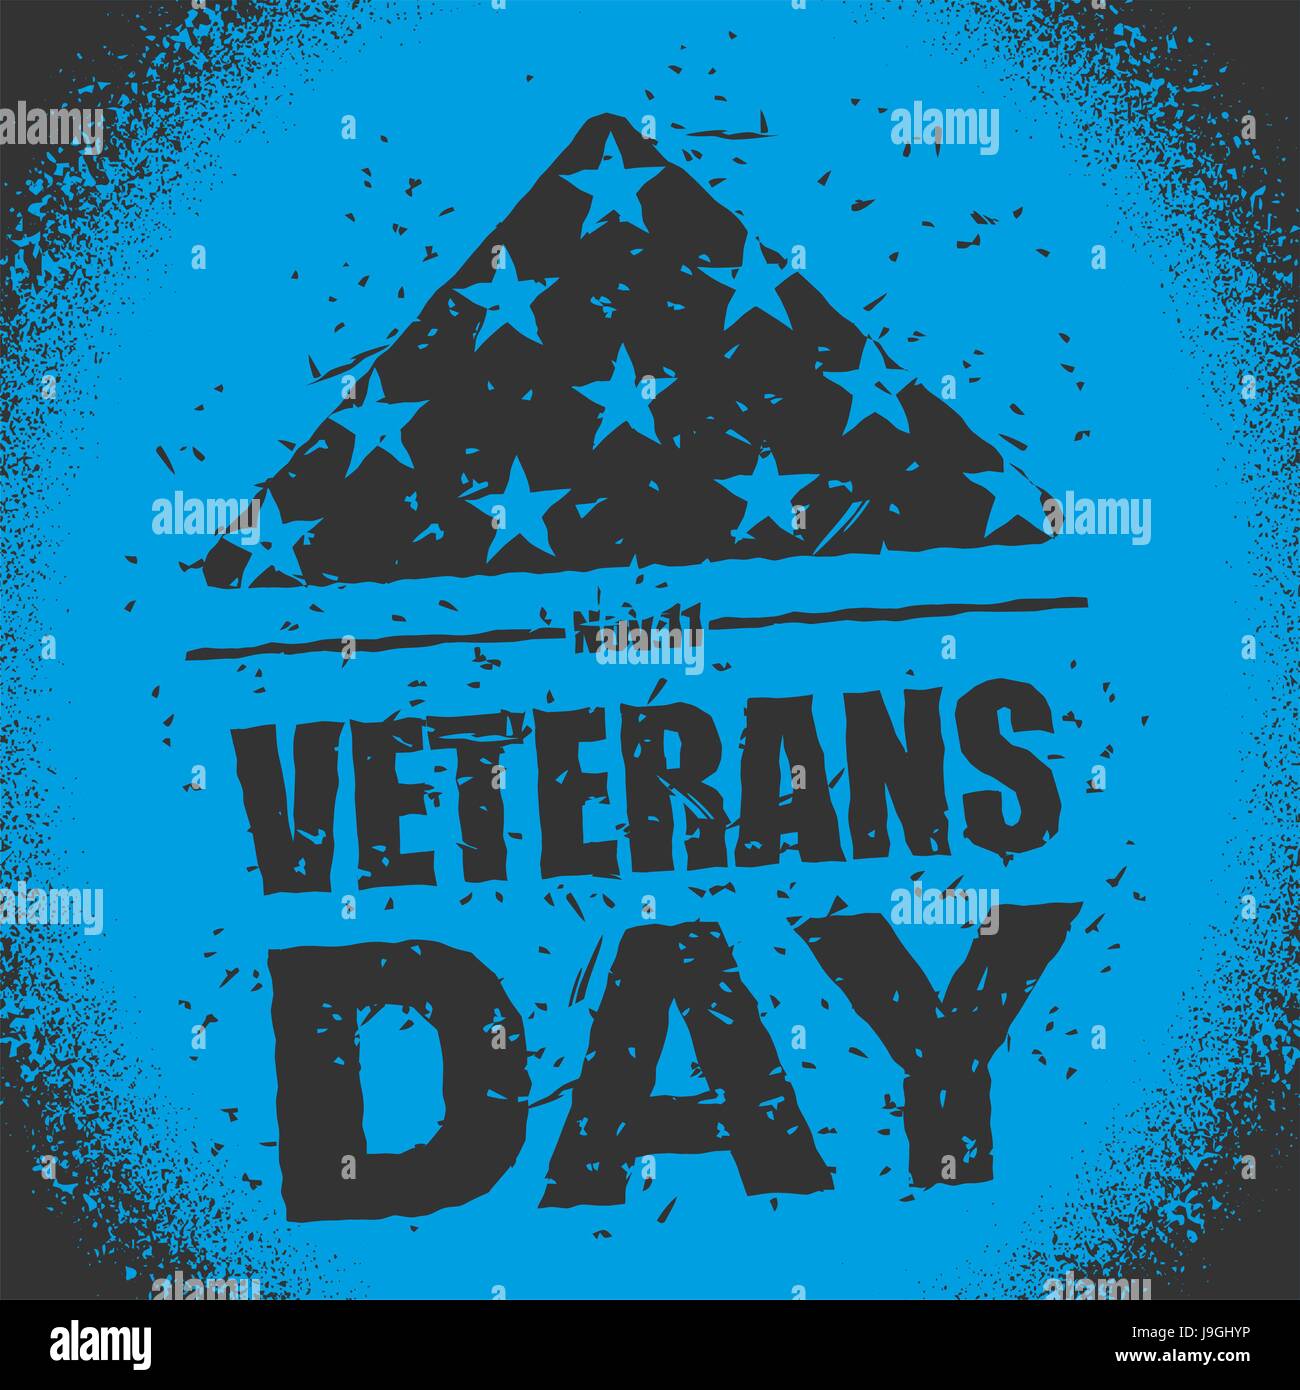 Veterans Day in USA. Flag America folded in triangle symbol of mourning. National sign of United States of sorrow. Emblem in grunge style for patrioti Stock Vector